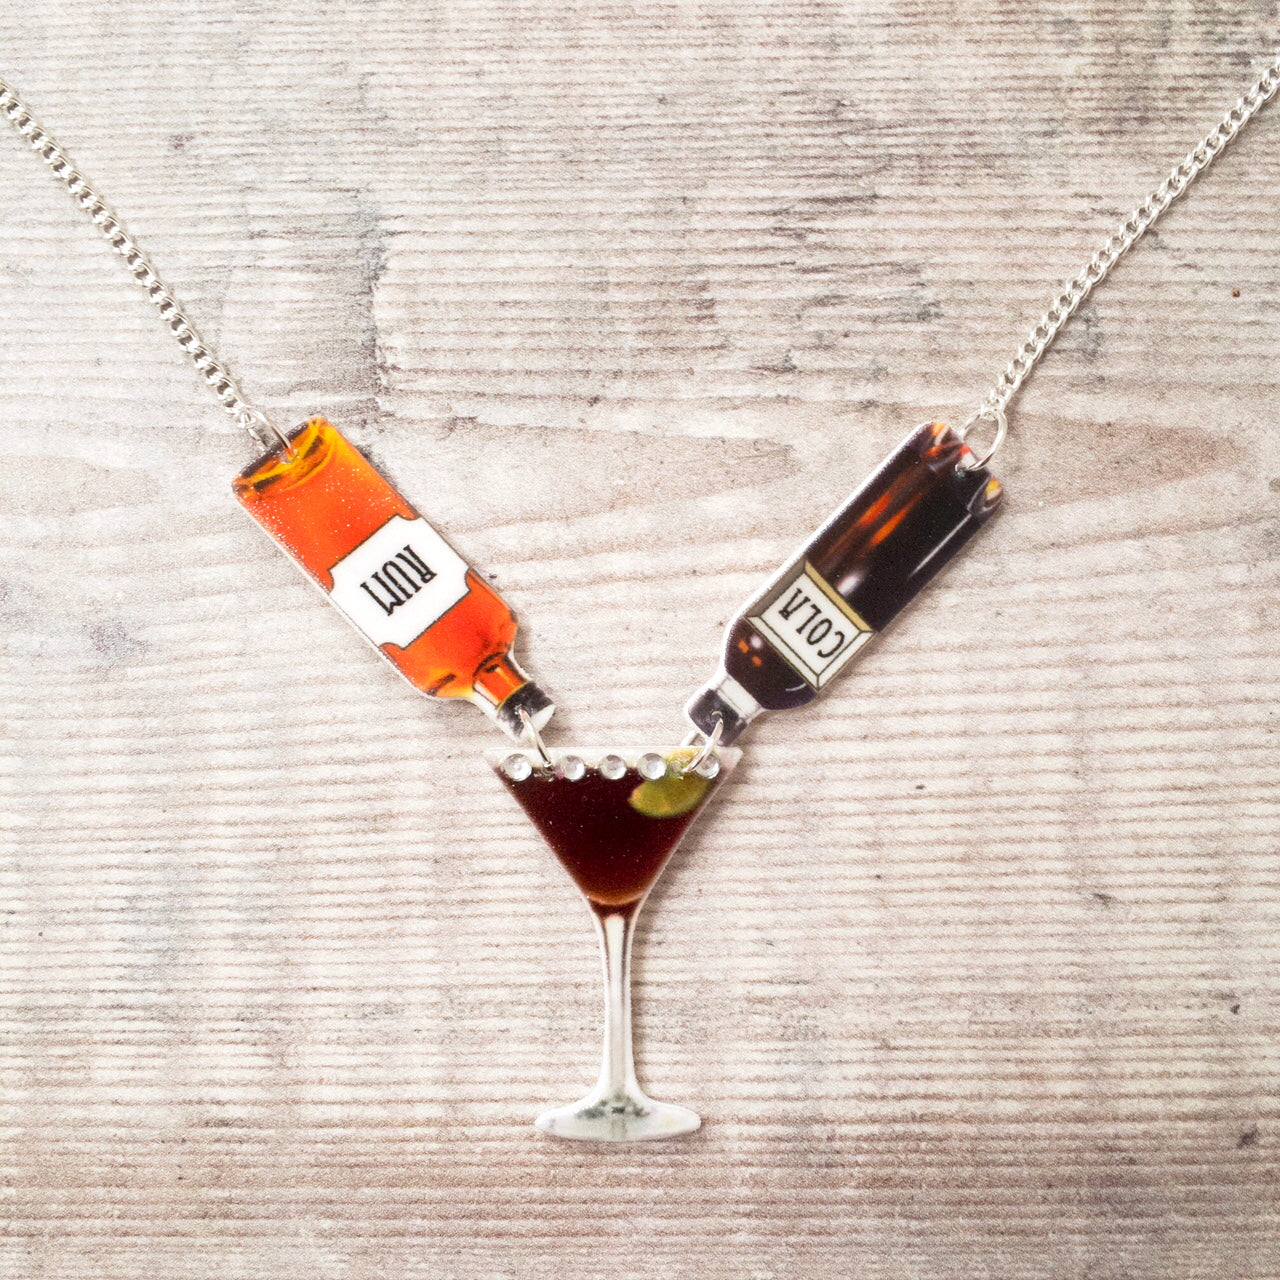 Rum and cola necklace - Cocktail necklace